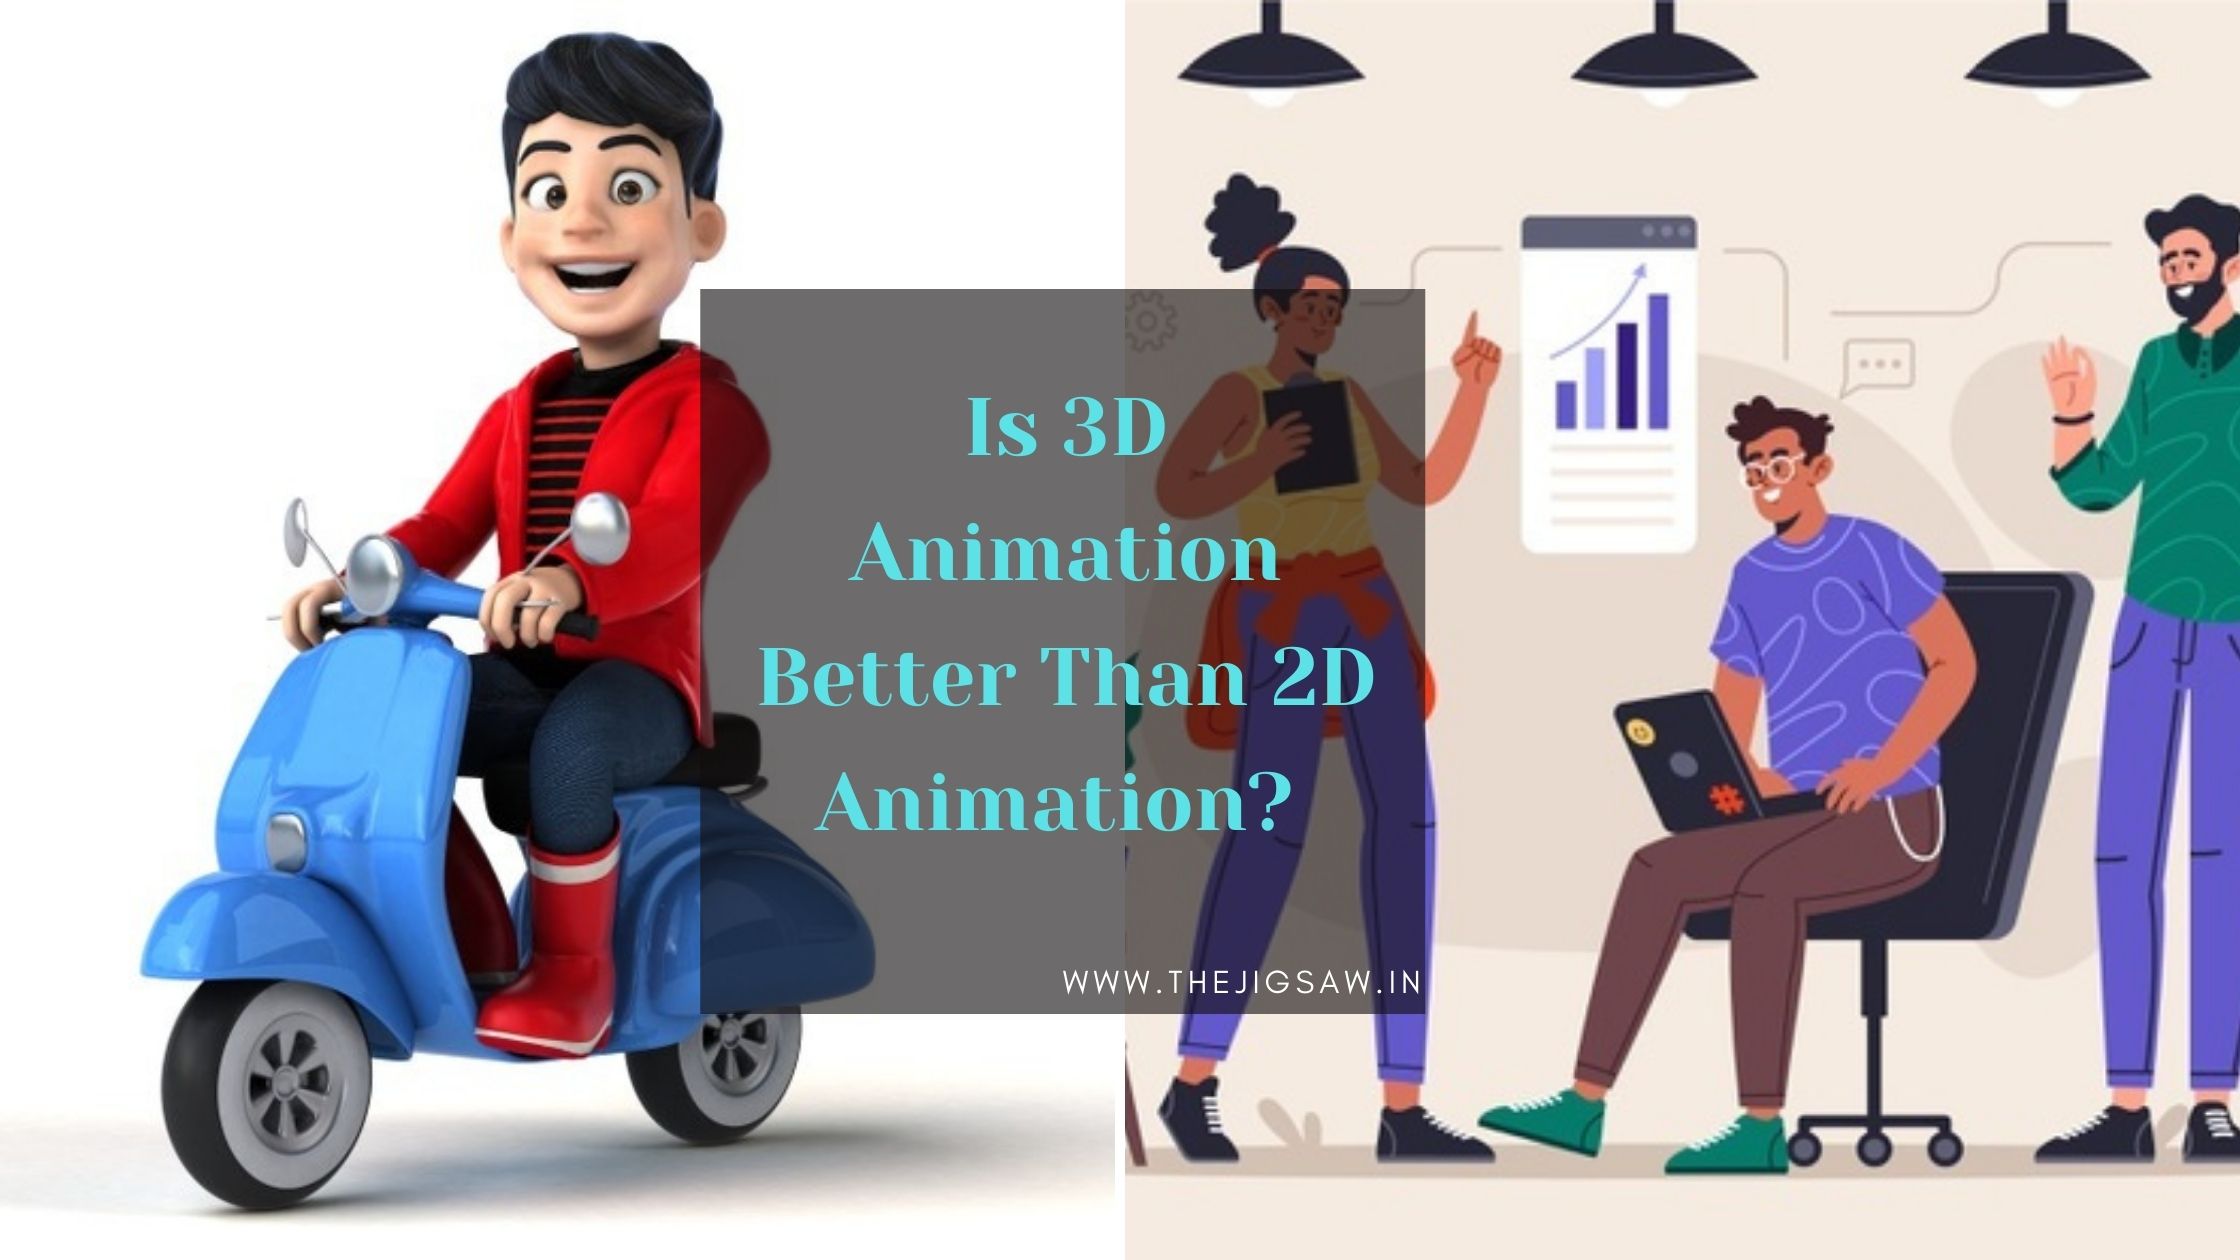 Is 3D Animation Better Than 2D Animation